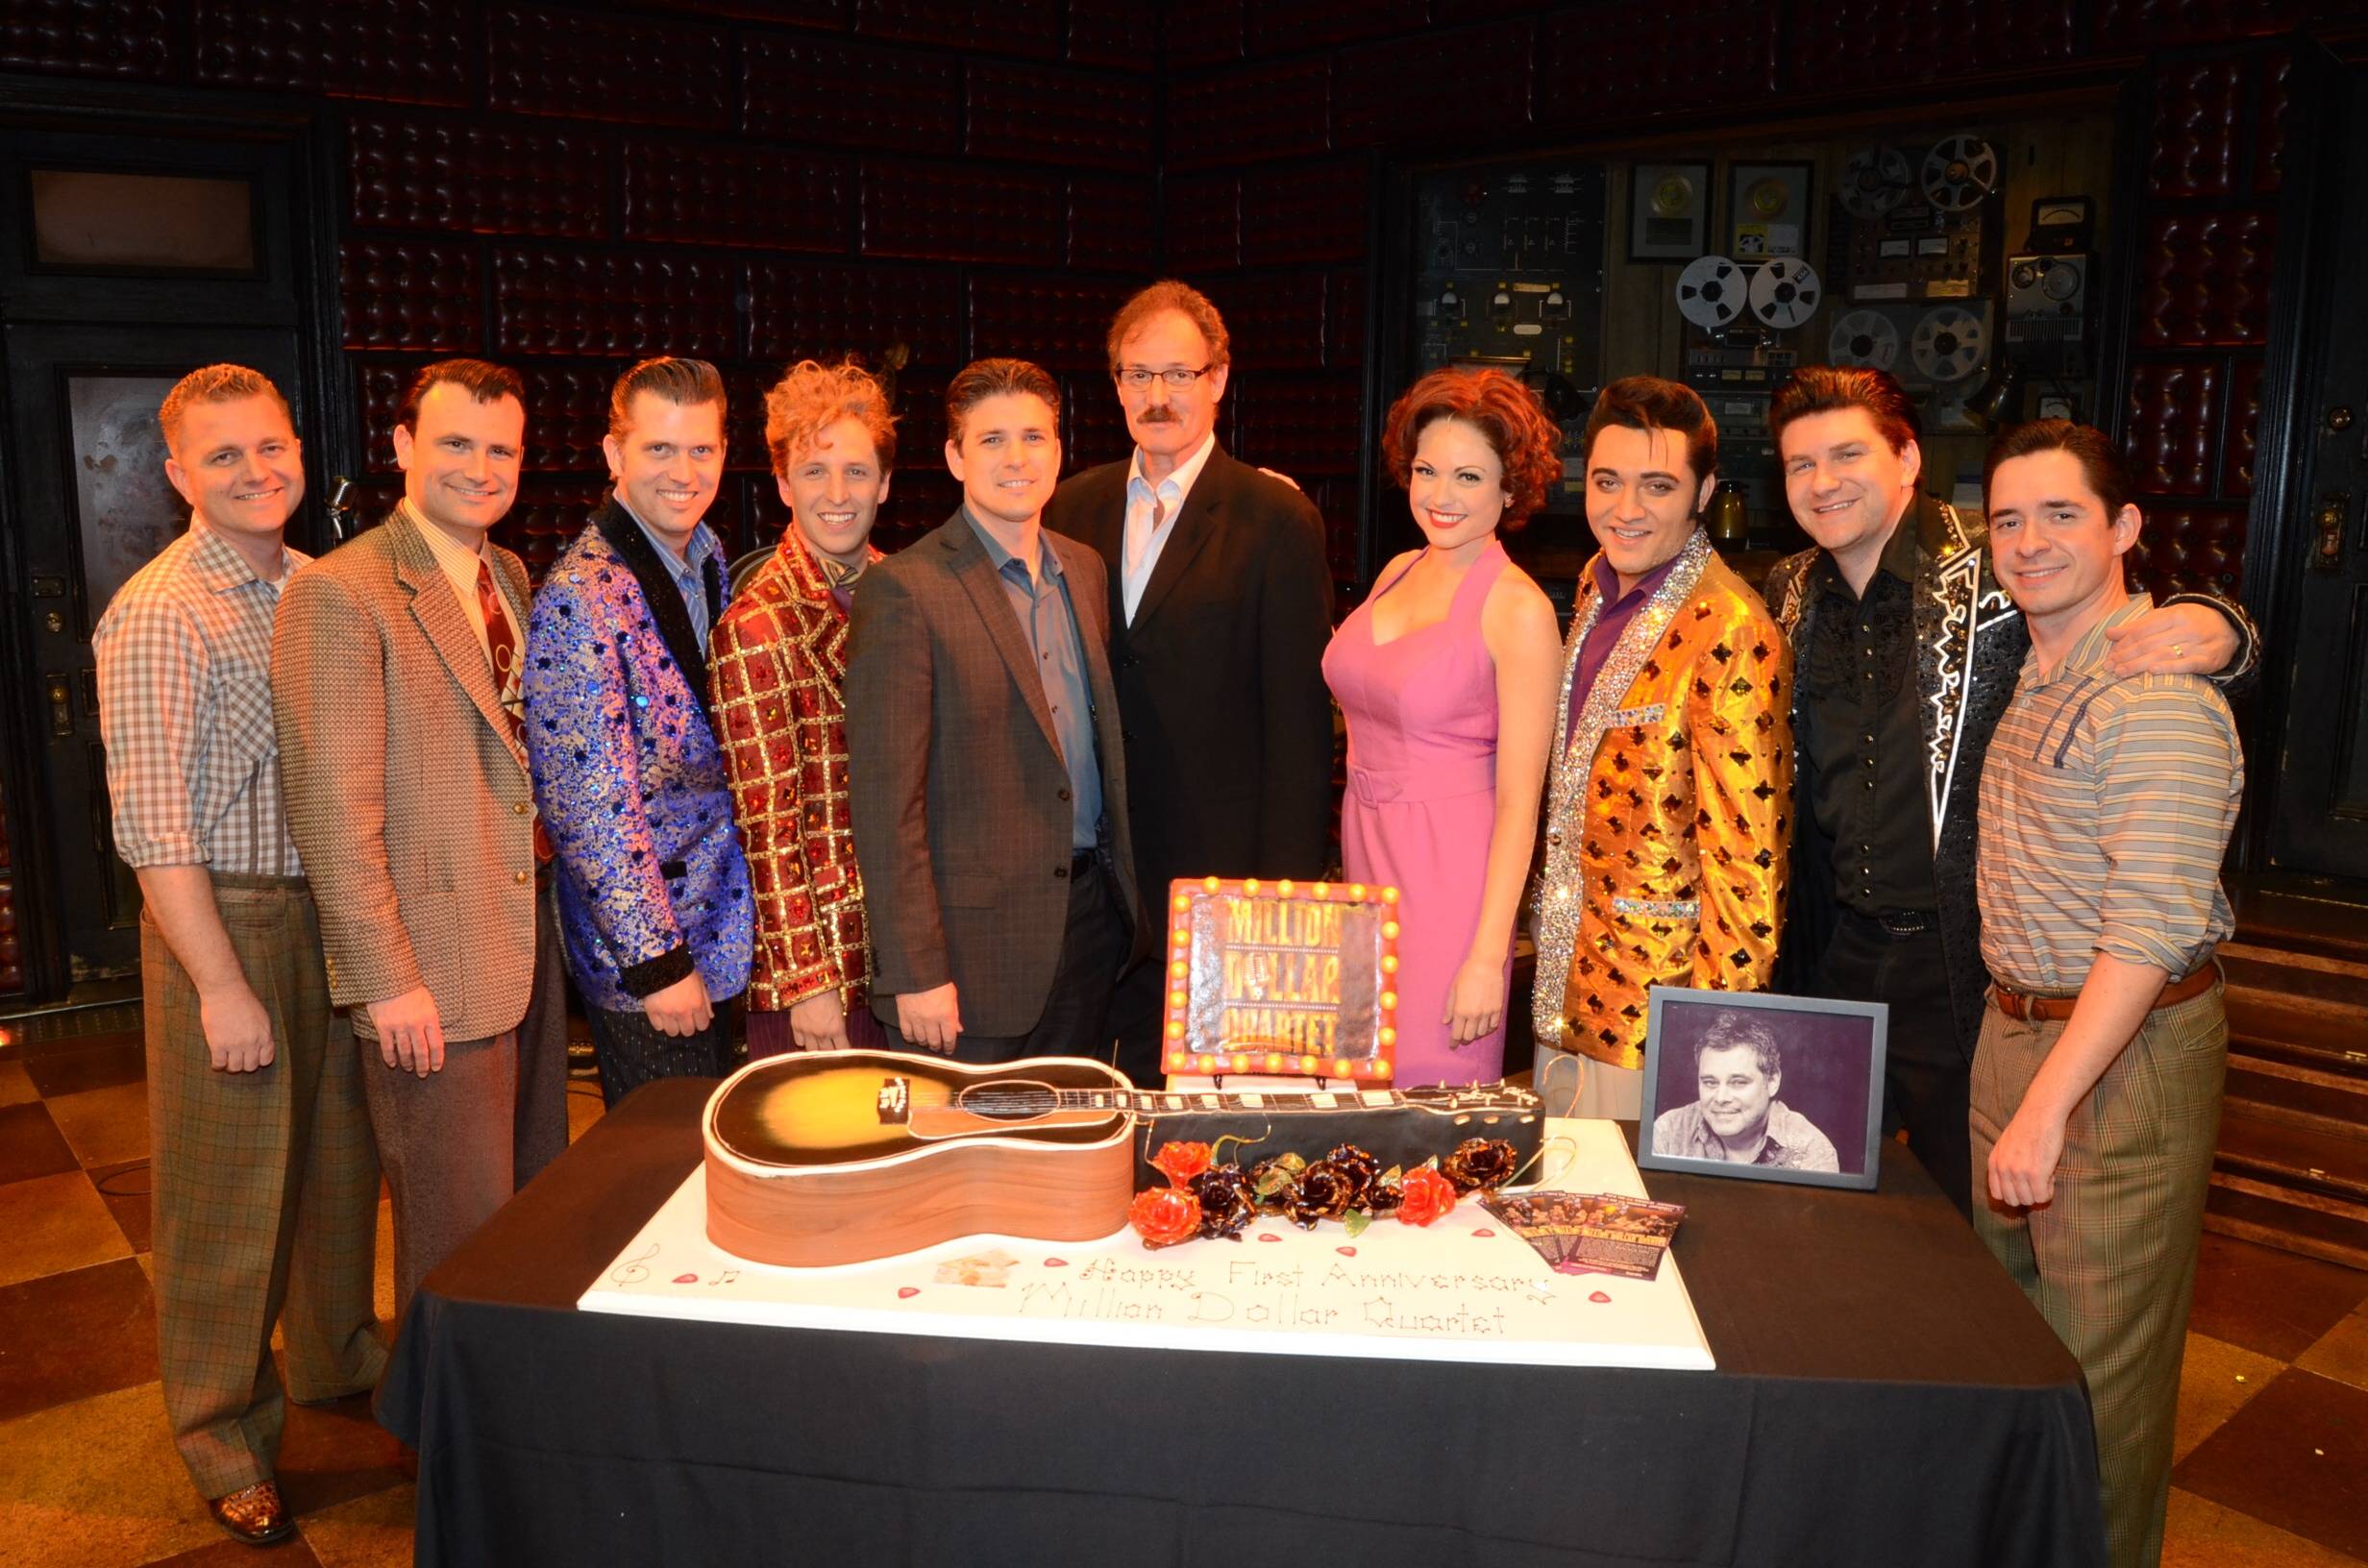 Cast of Million Dollar Quartet Las Vegas with Caesars Entertainment Executive Damian Costa and Ted Rawlins 2; First Anniversary 2.19.14 ©Caesars Entertainment